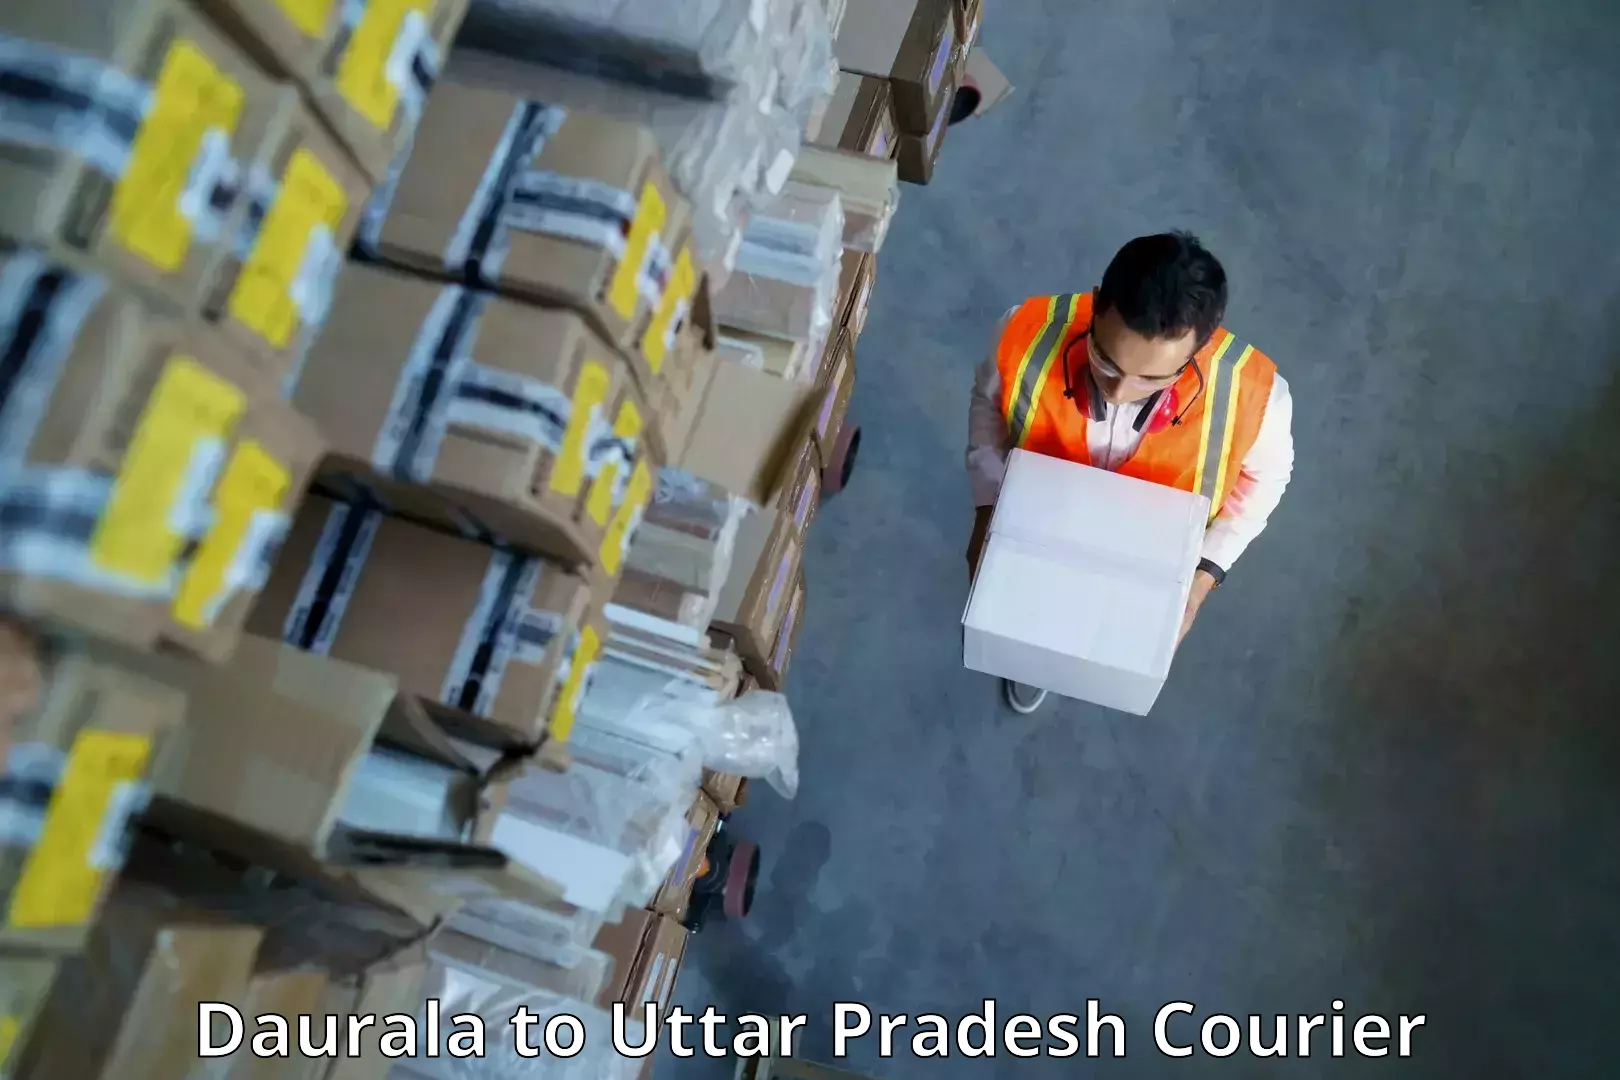 Flexible delivery schedules Daurala to Sonbhadra